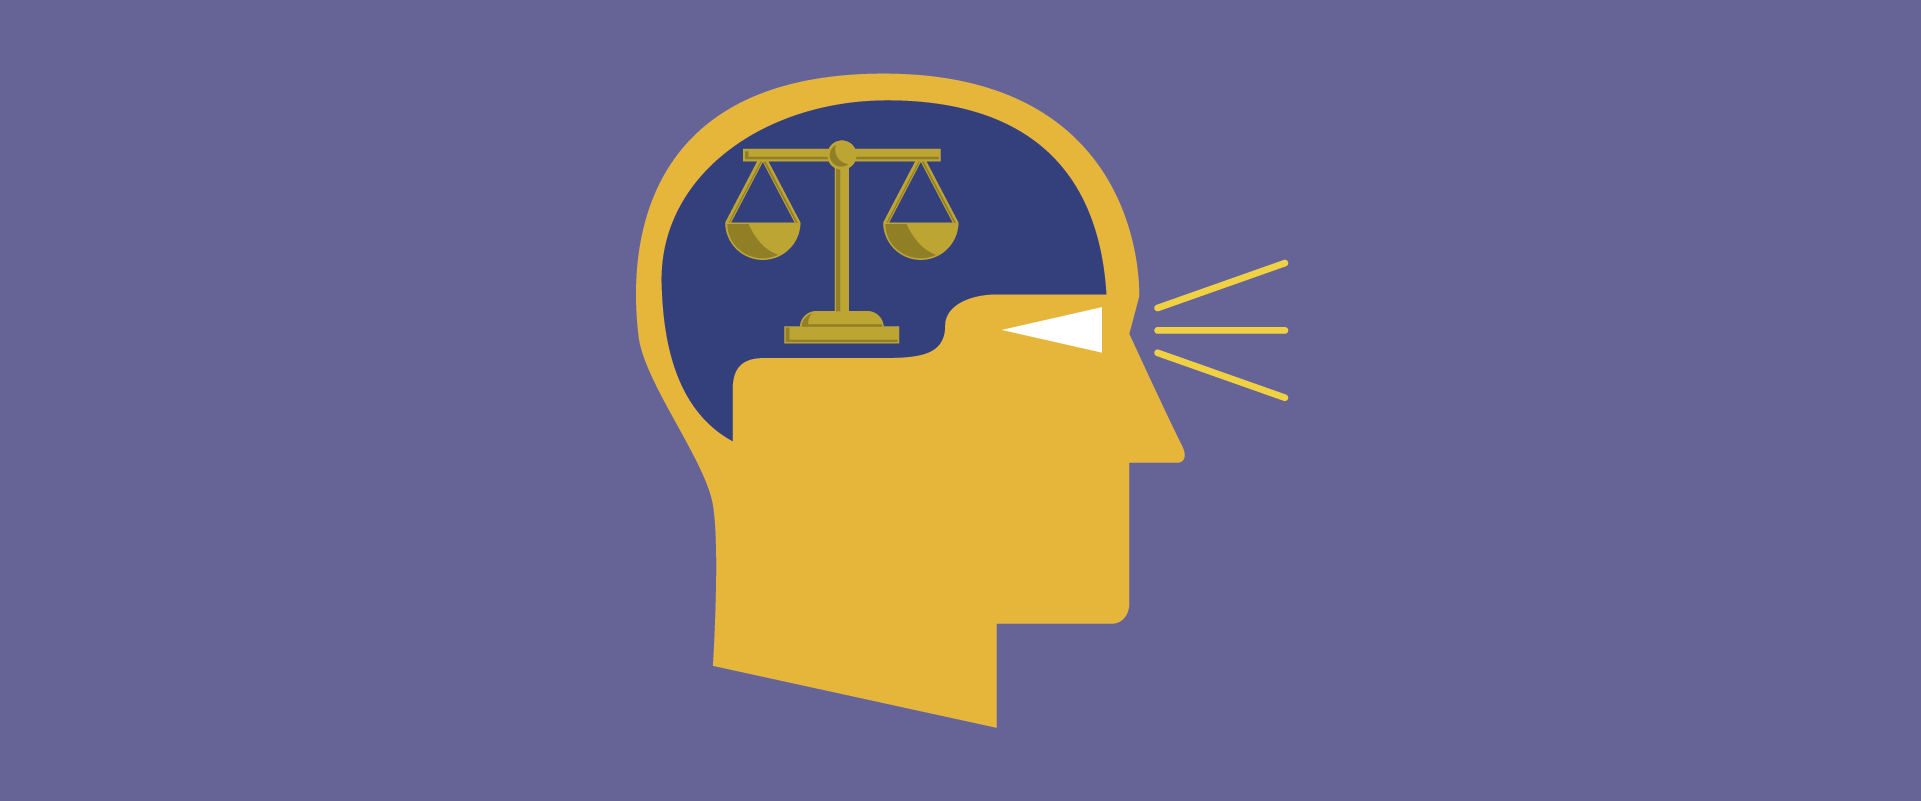 Illustration of a head with scales of justice to symbolize equity